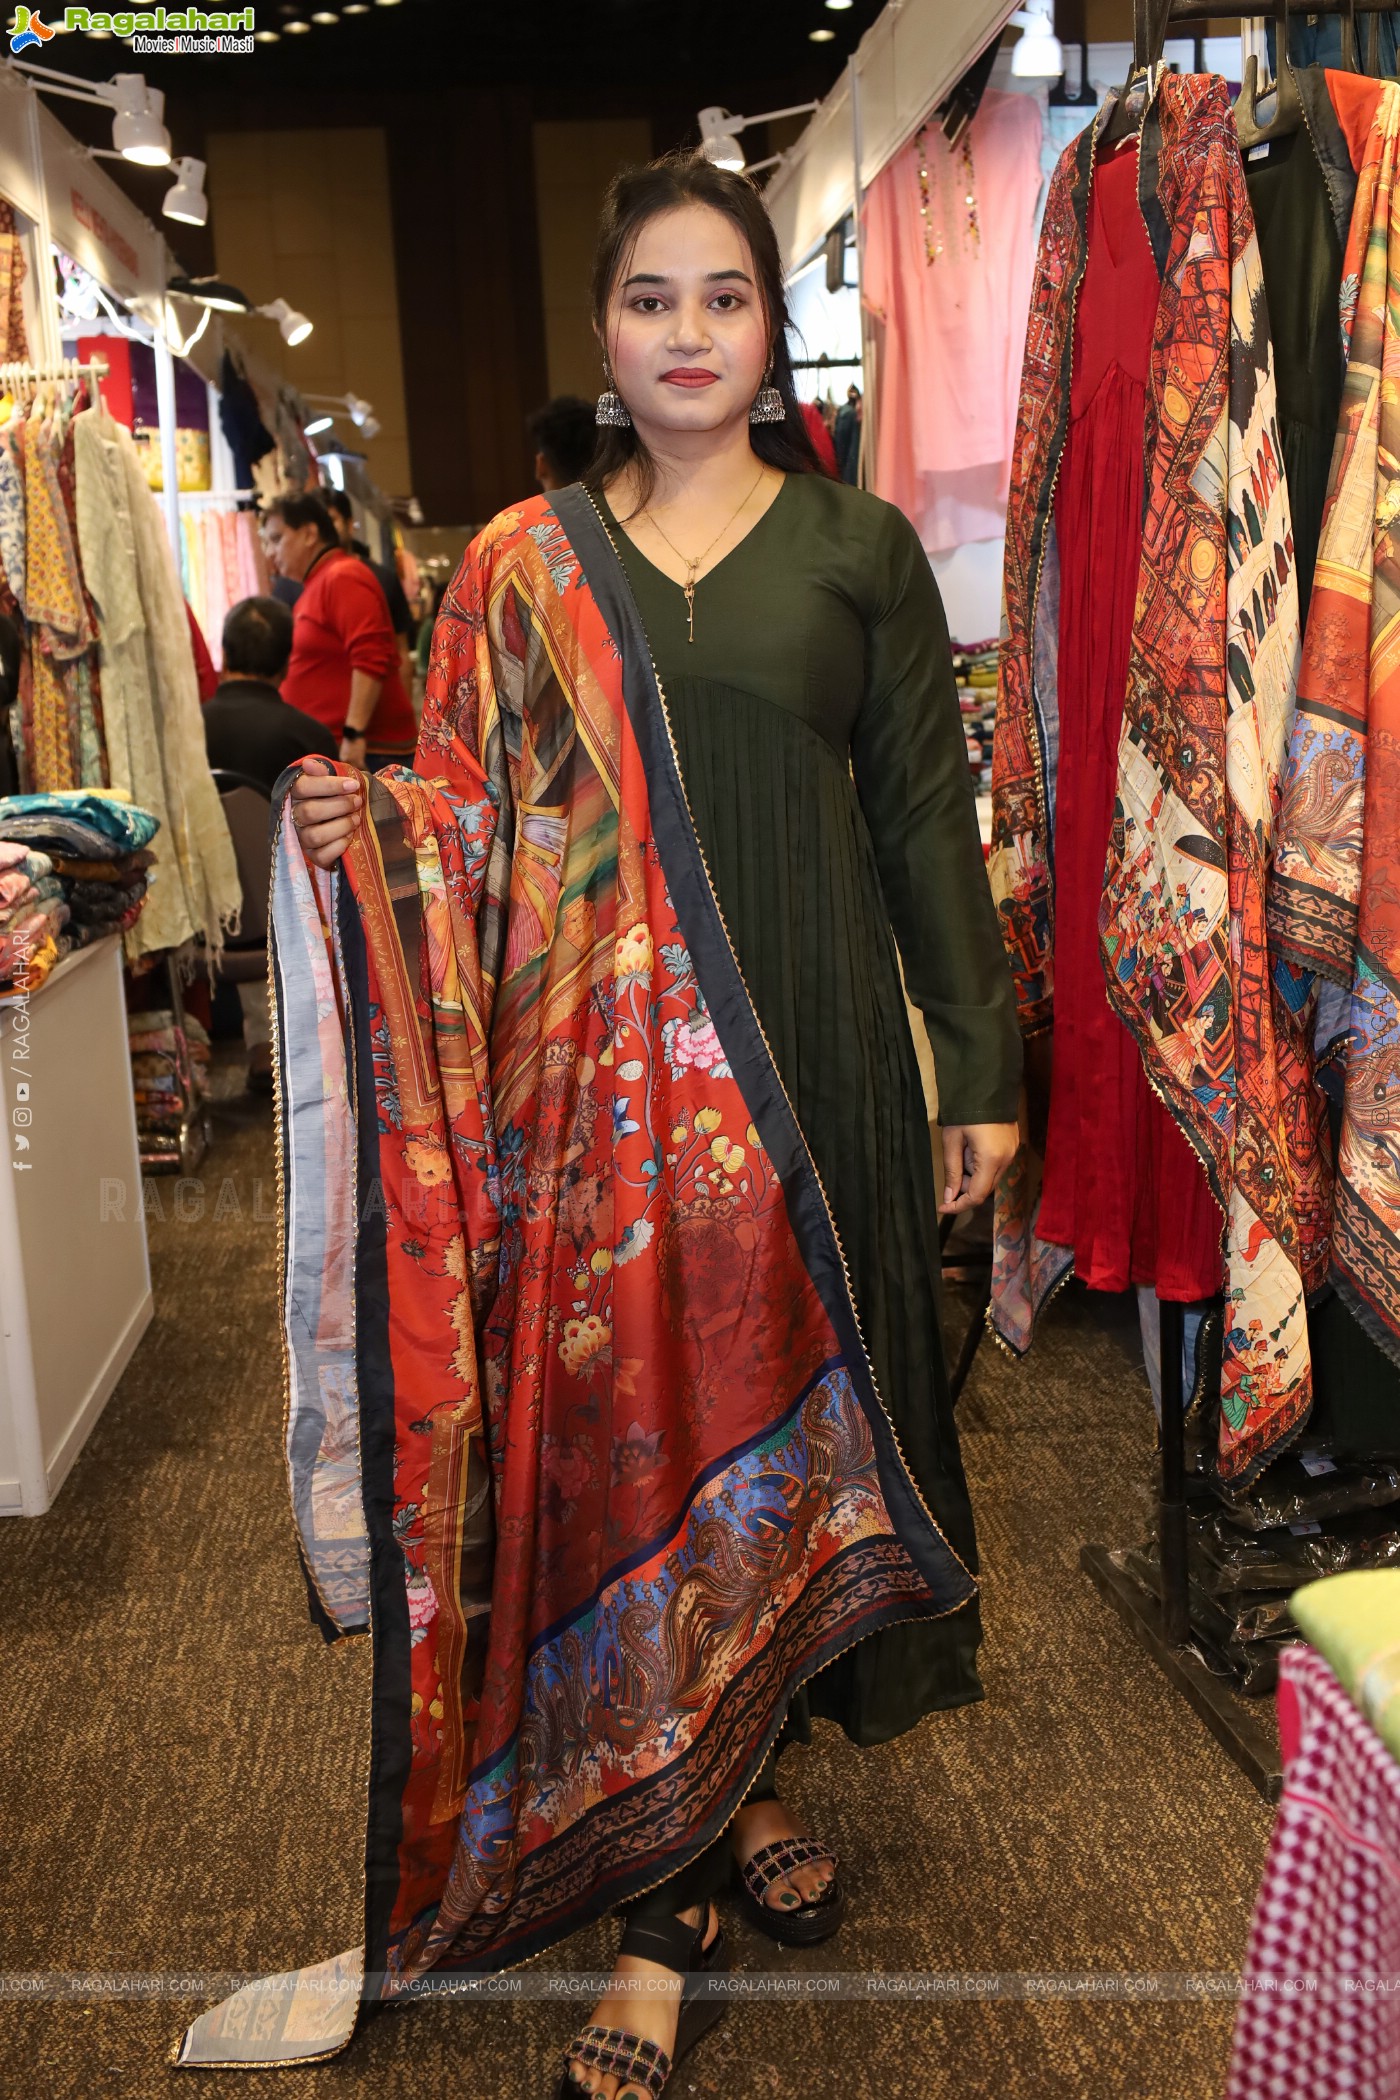 Sutraa: Indian Fashion Lifestyle Exhibition, Wedding Special Event